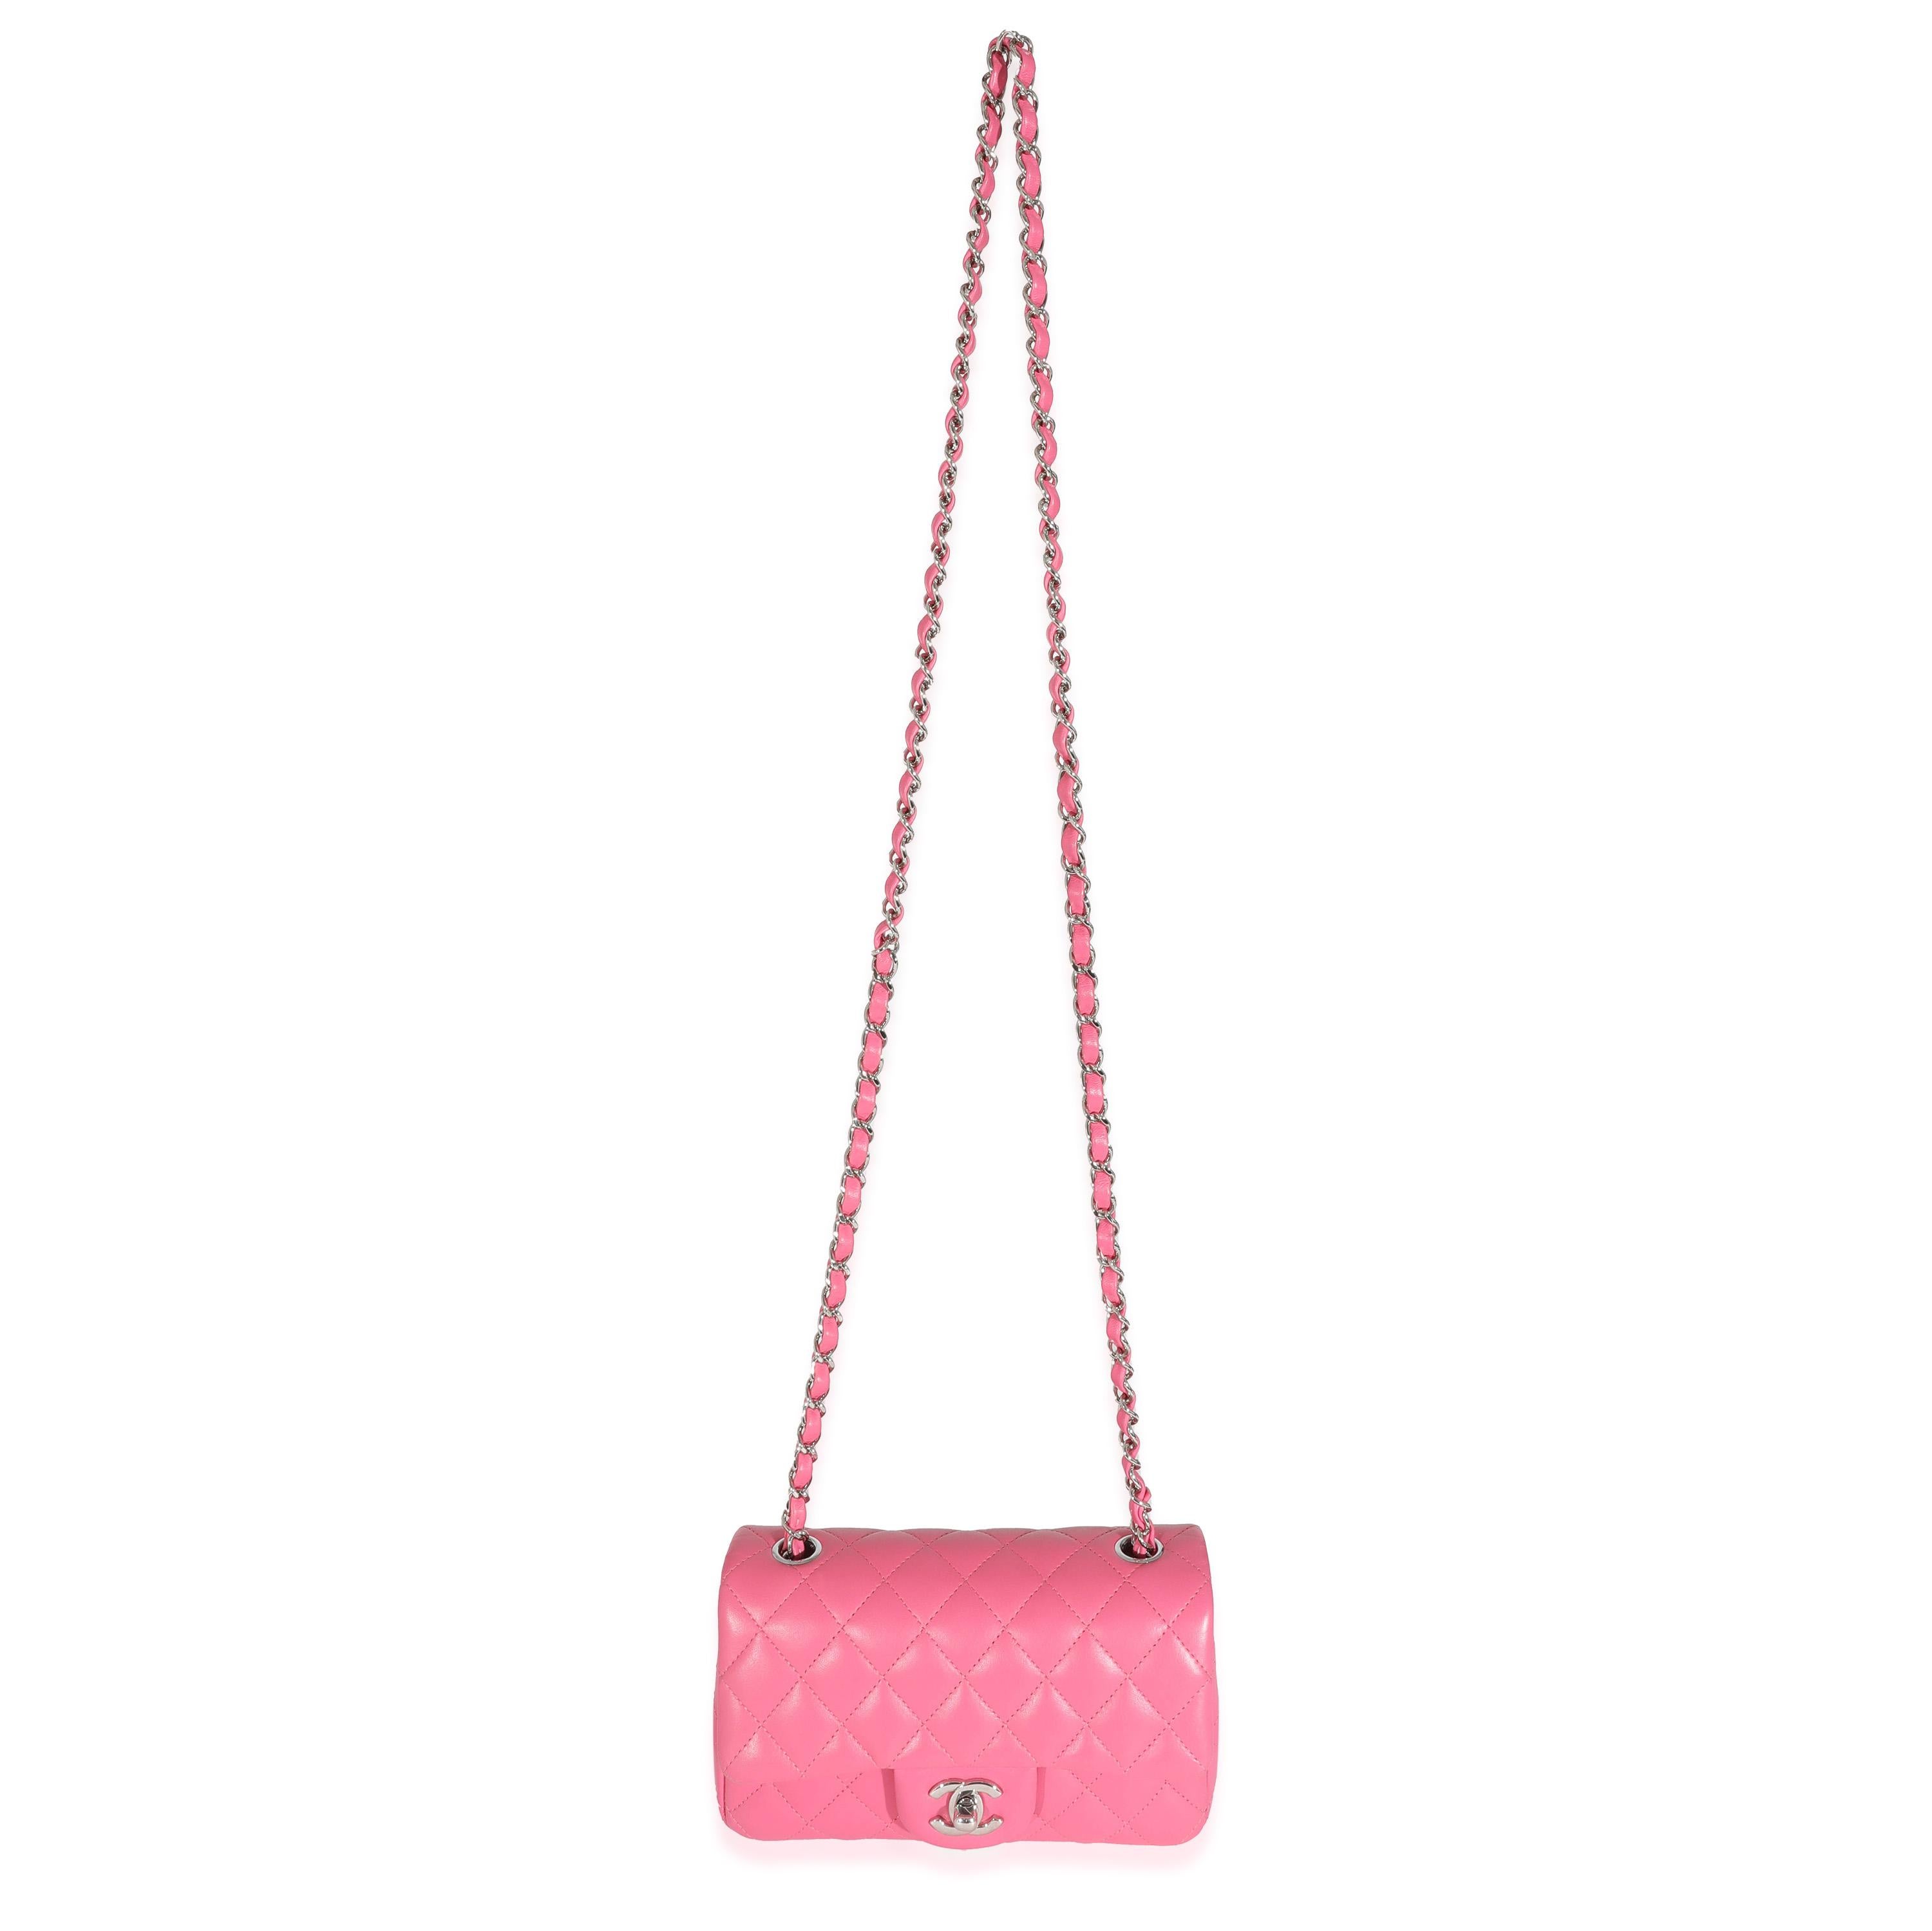 Listing Title: Chanel Pink Lambskin Classic Mini Rectangular Flap Bag
SKU: 131659
Condition: Pre-owned 
Condition Description: A timeless classic that never goes out of style, the flap bag from Chanel dates back to 1955 and has seen a number of